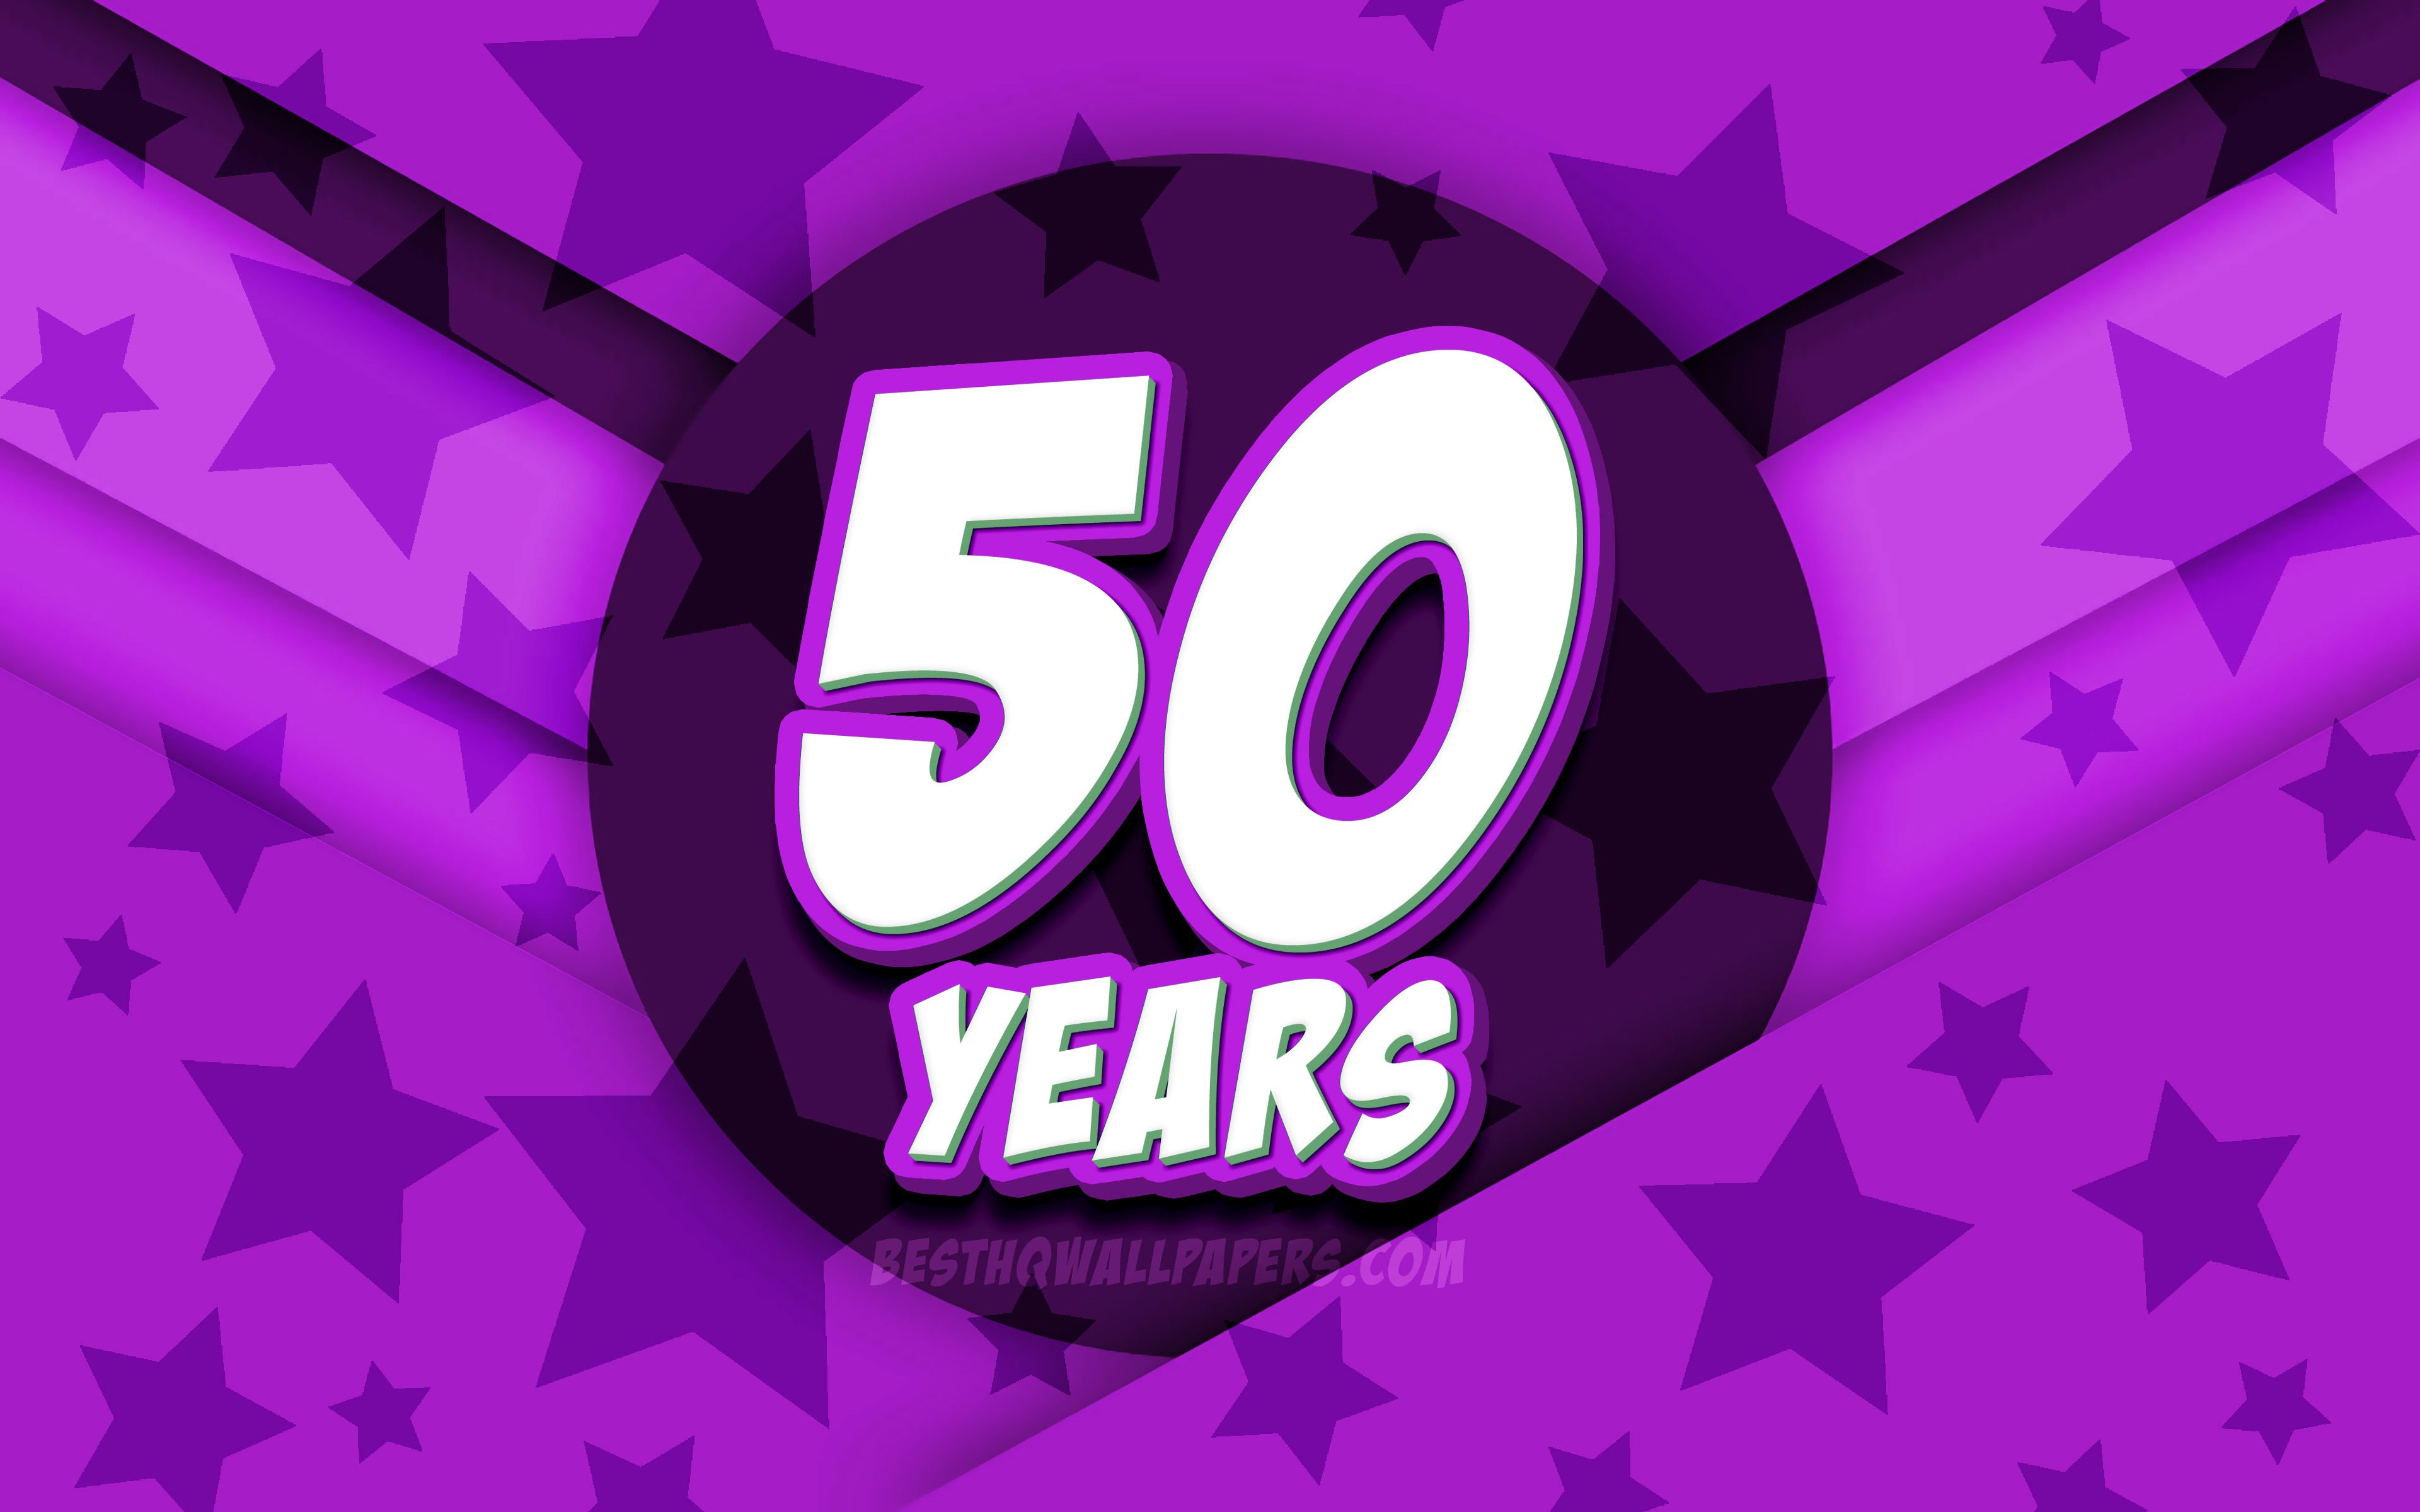 Download wallpaper 4k, Happy 50 Years Birthday, comic 3D letters, Birthday Party, violet stars background, Happy 50th birthday, 50th Birthday Party, artwork, Birthday concept, 50th Birthday for desktop with resolution 3840x2400. High